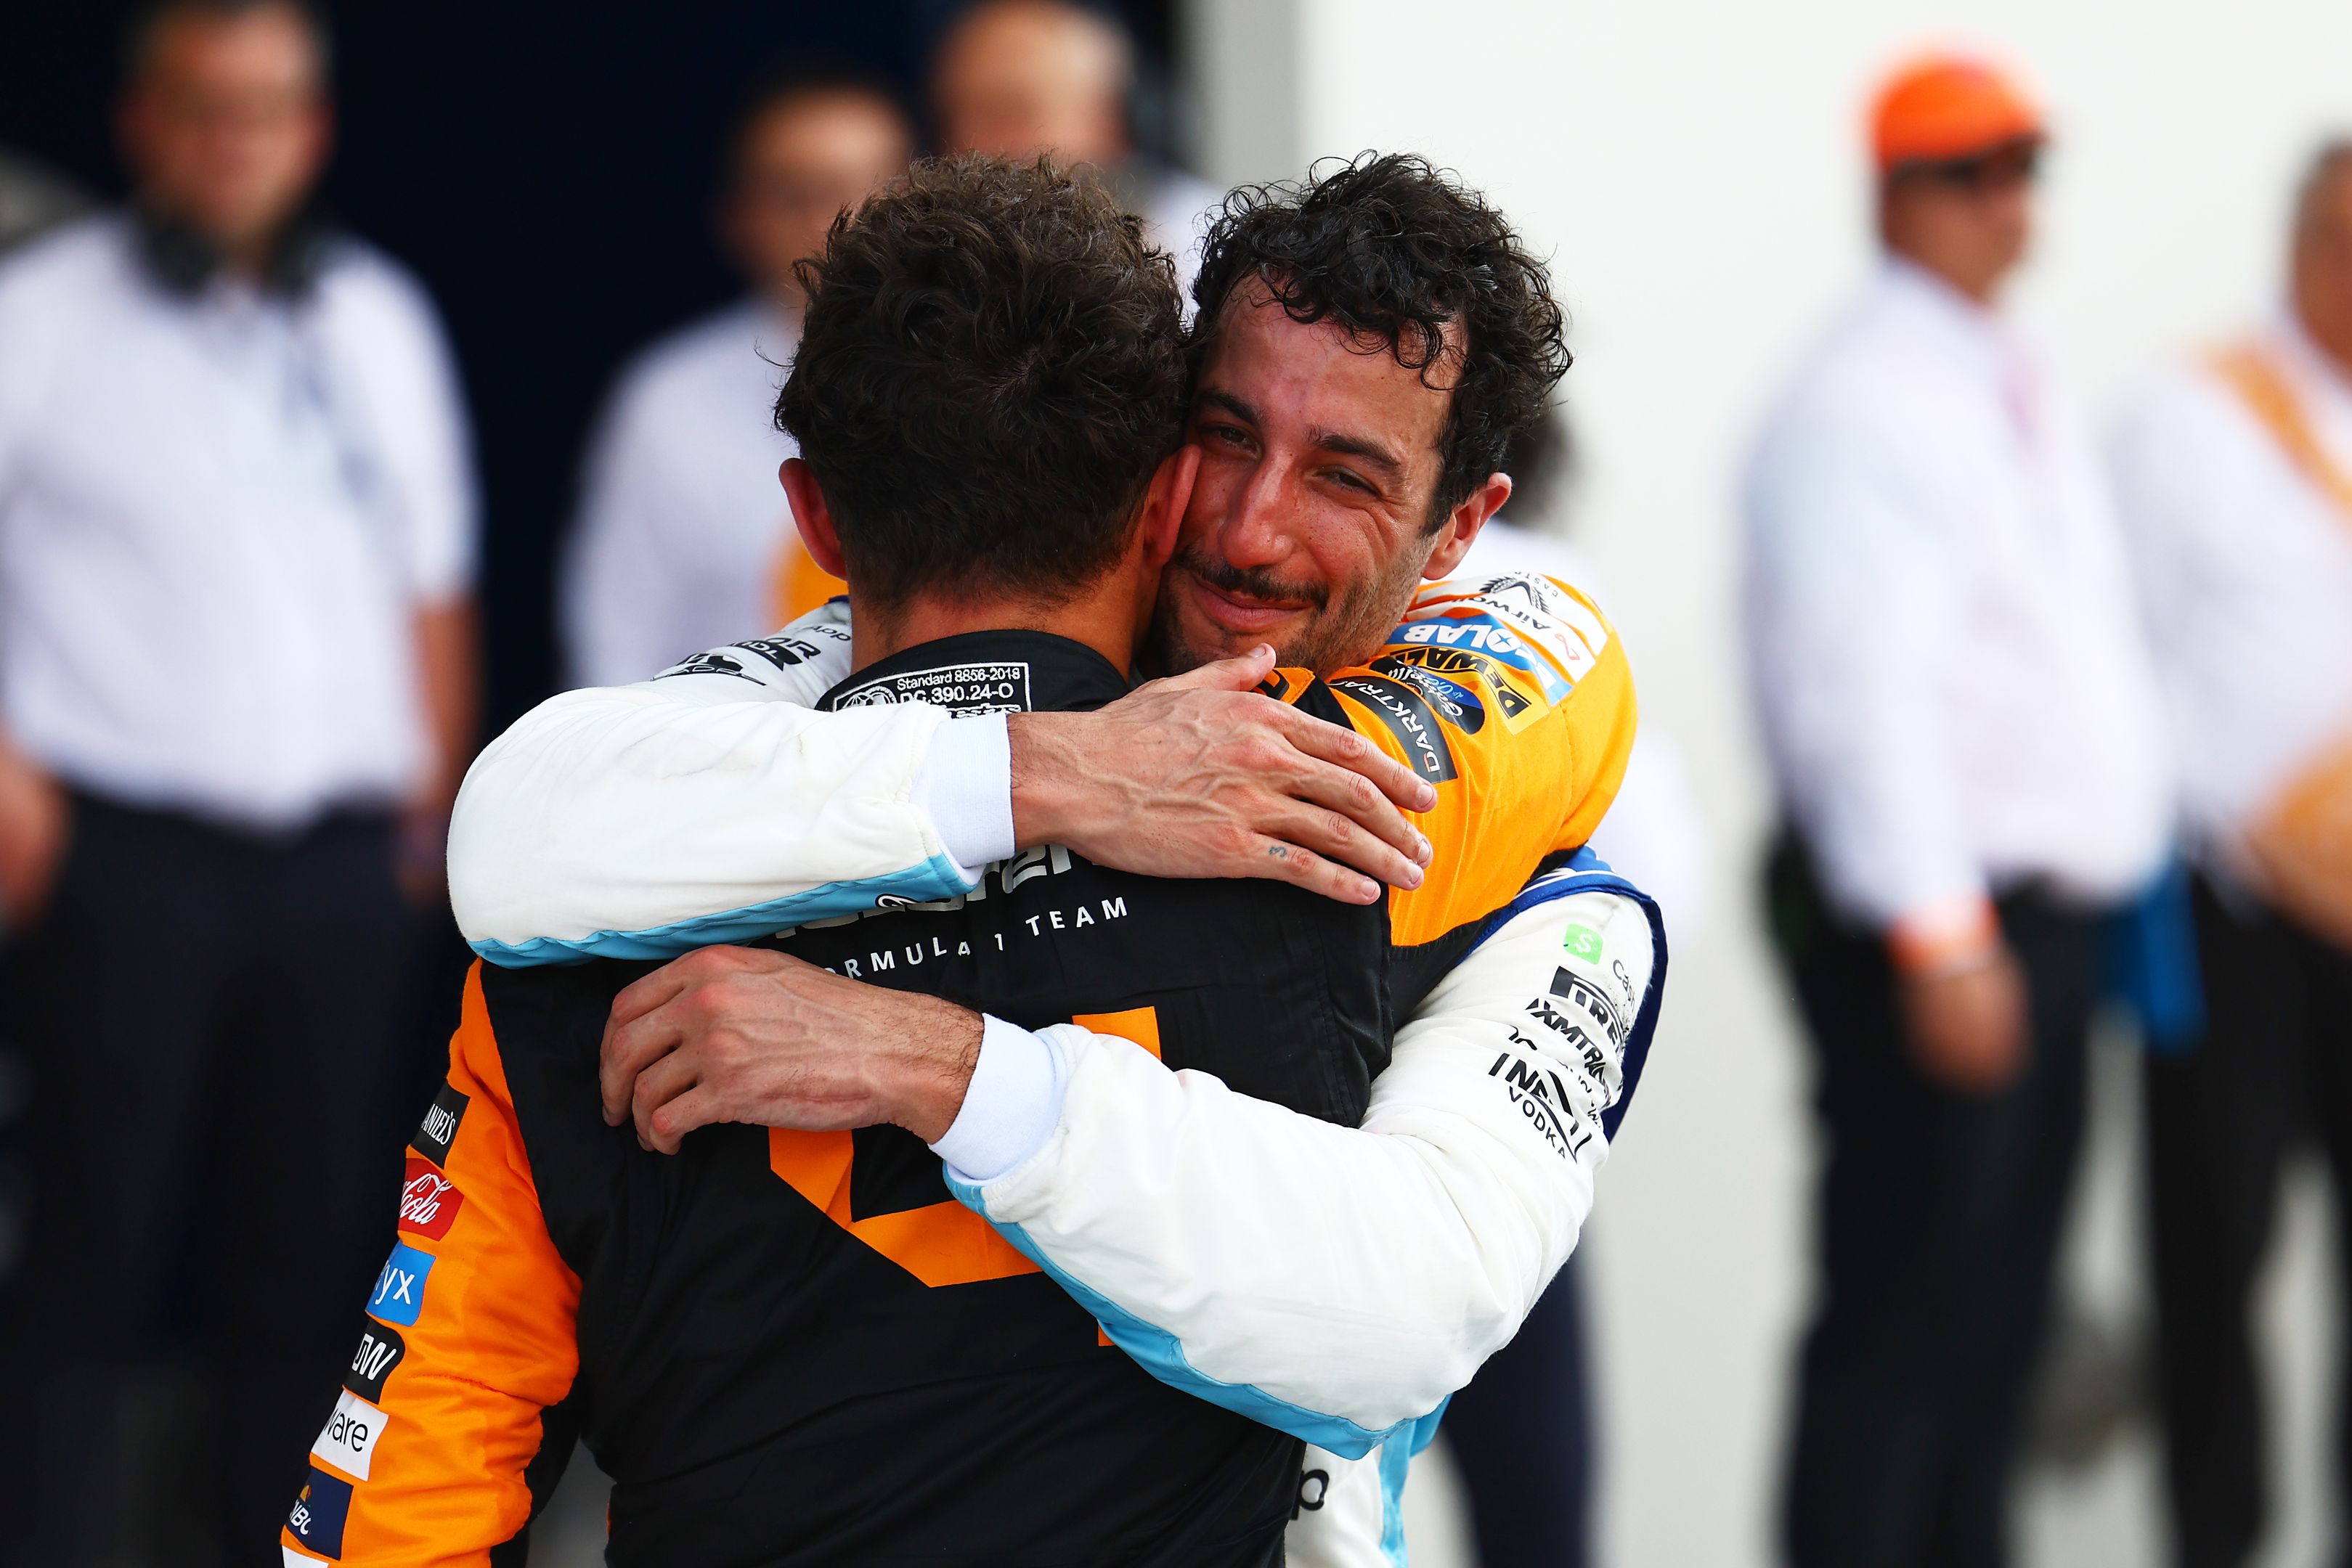 Daniel Ricciardo shares touching moment with former teammate Lando Norris after maiden F1 victory